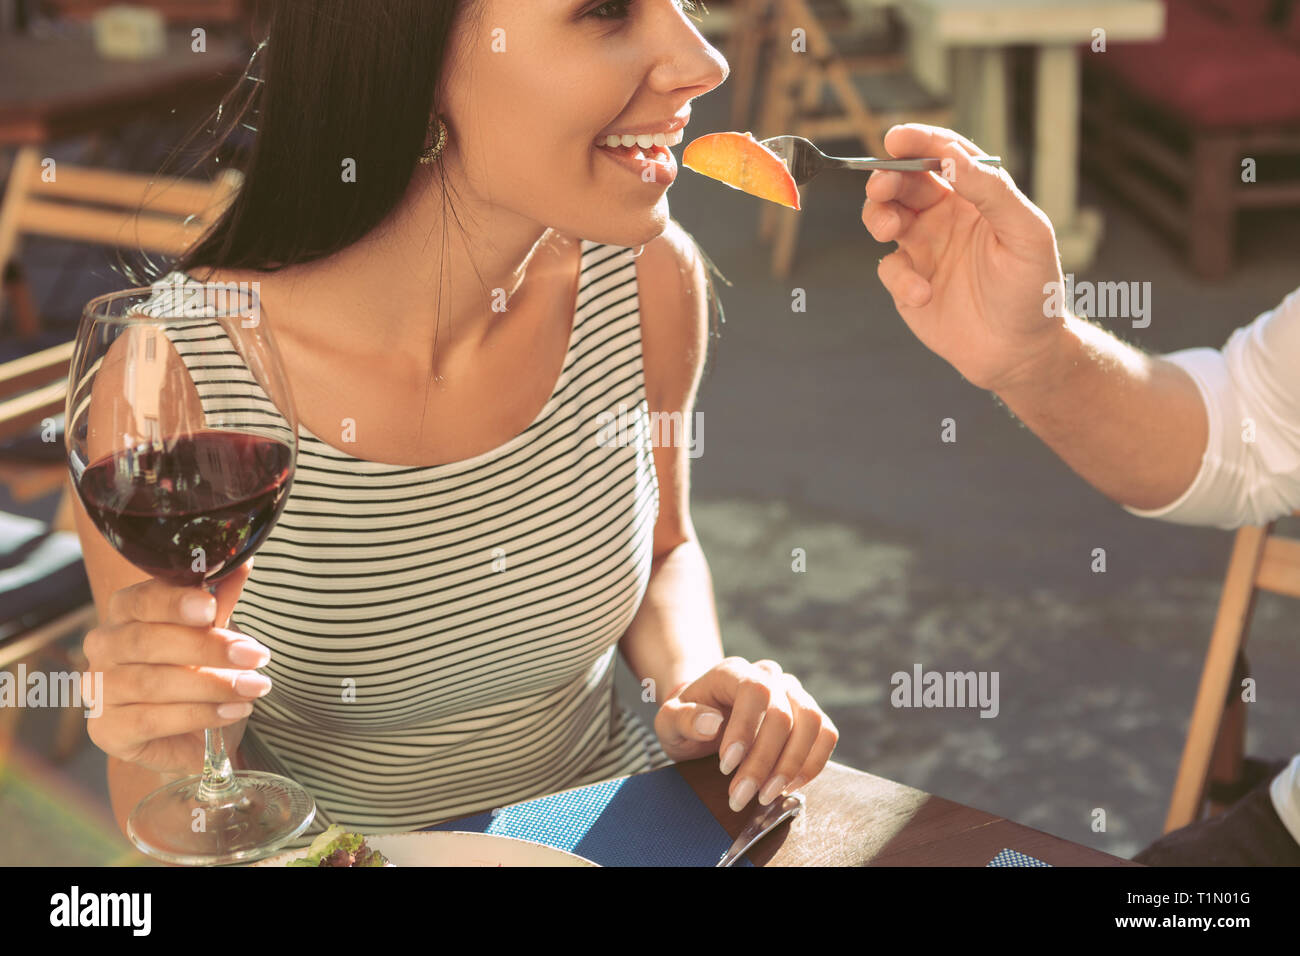 Beautiful long-haired lady carrying tall glass of red wine Stock Photo